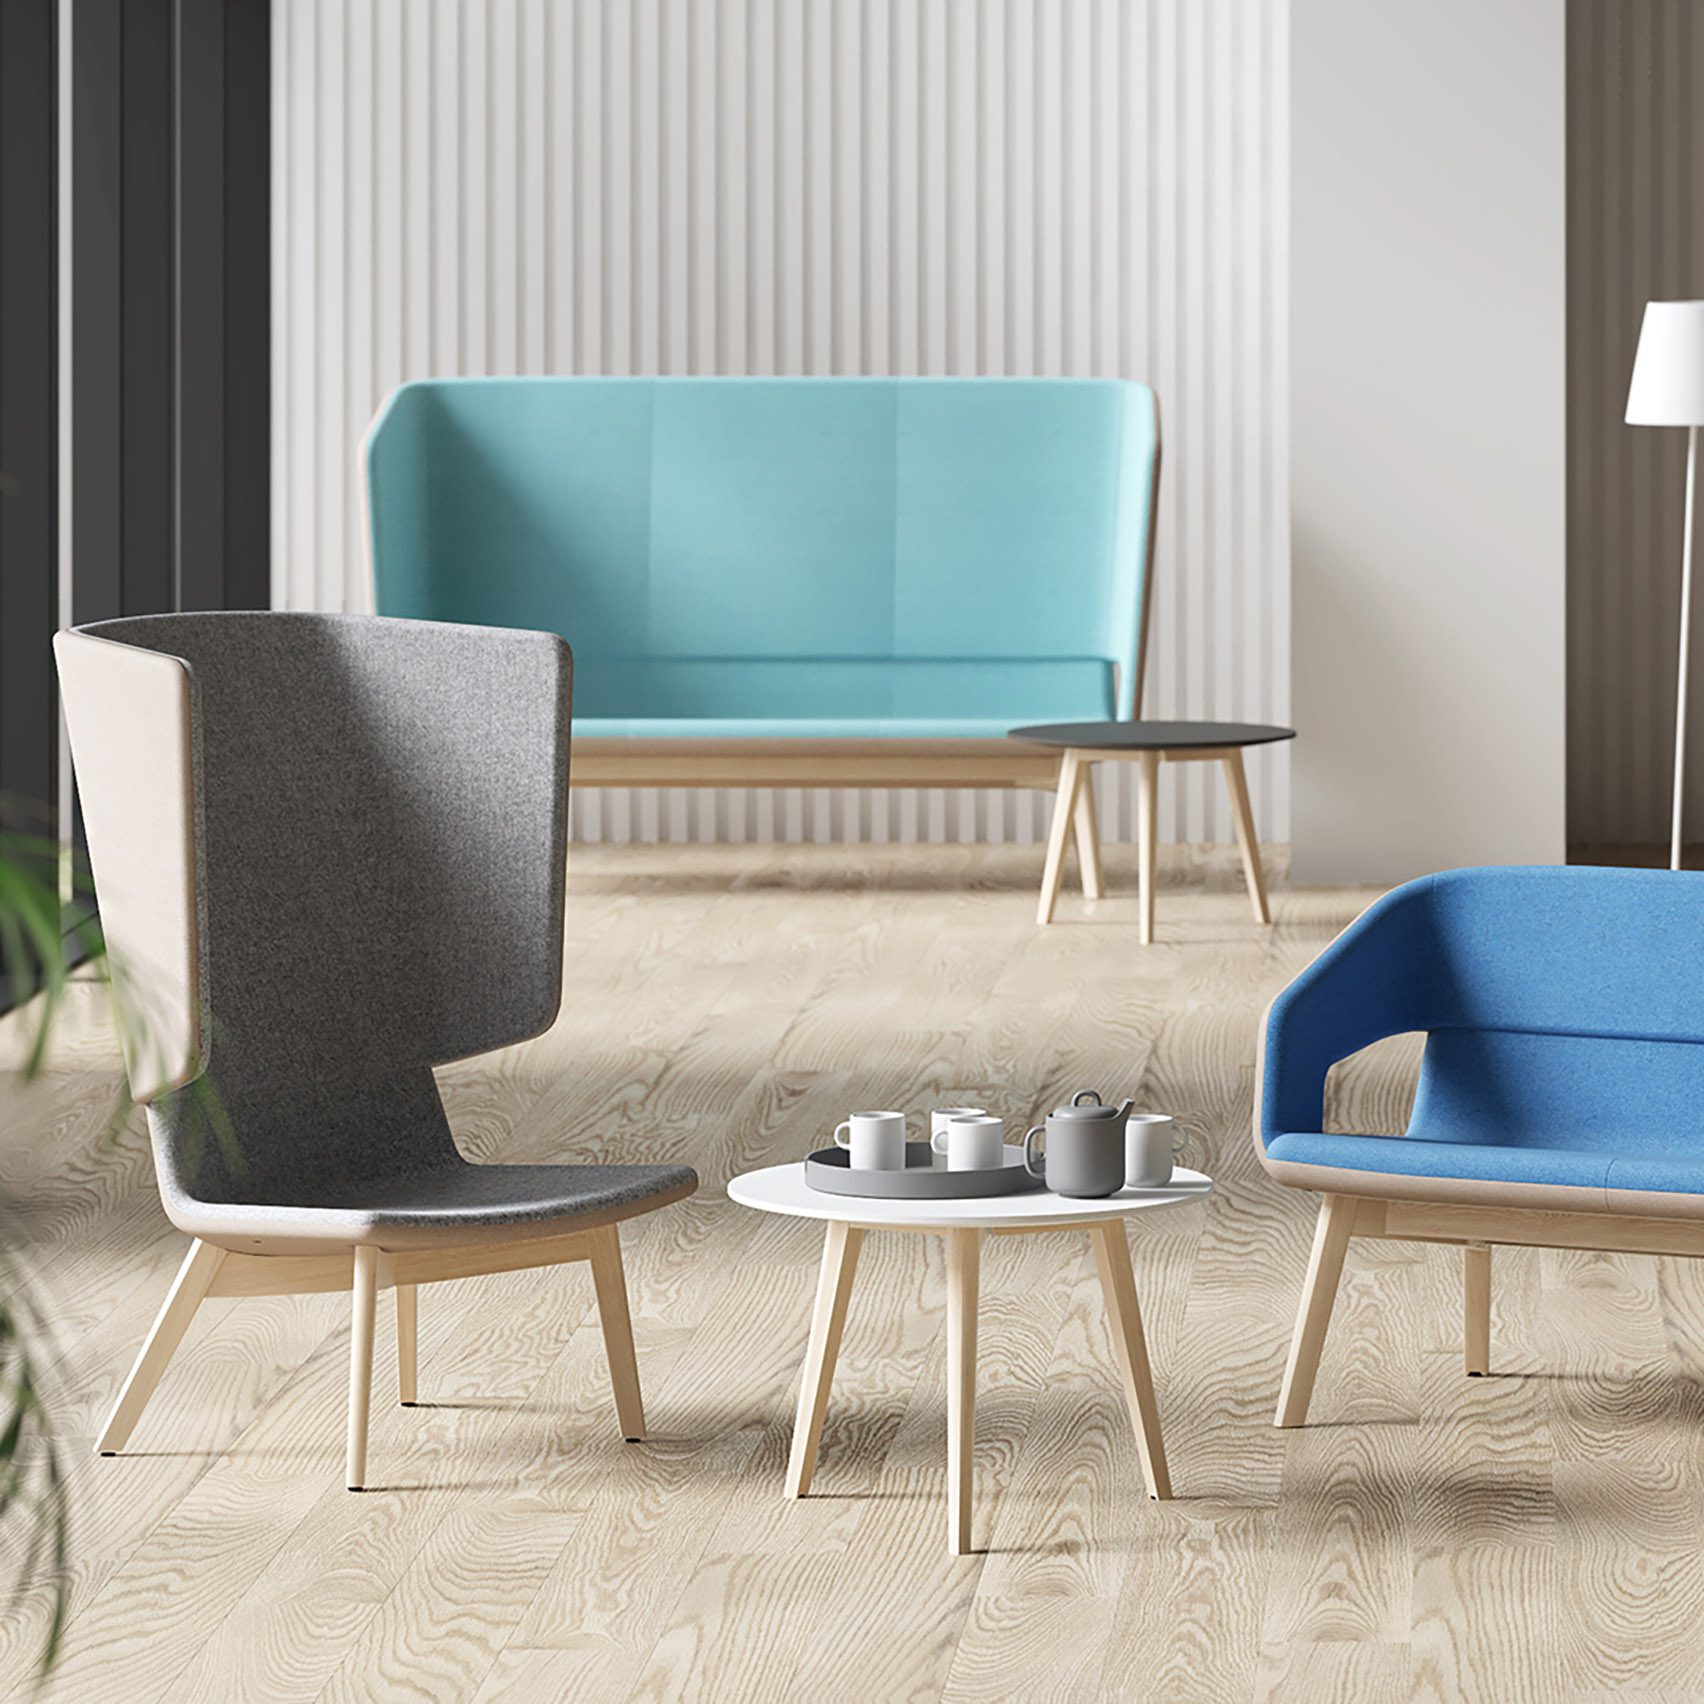 Twist & Sit Soft chairs by Christina Strand and Niels Hvass for Narbutas